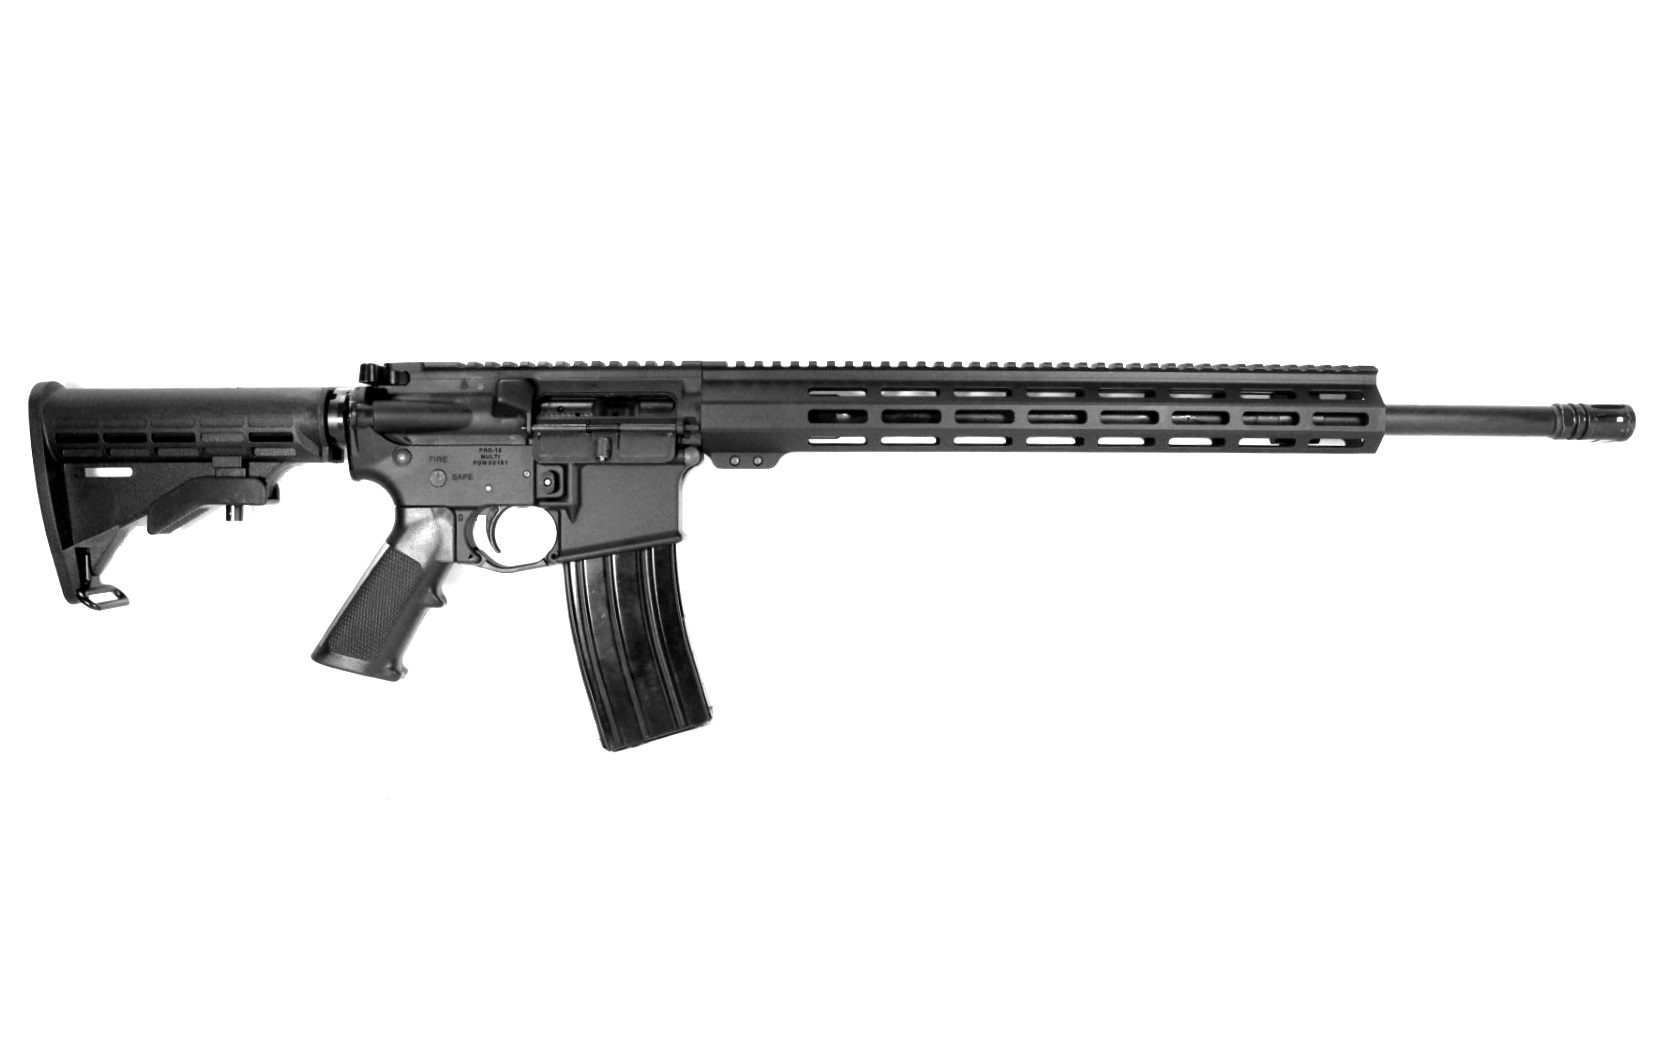 20 inch 5.56 NATO AR-15 Rifle | Milspec or Better Components | US MADE